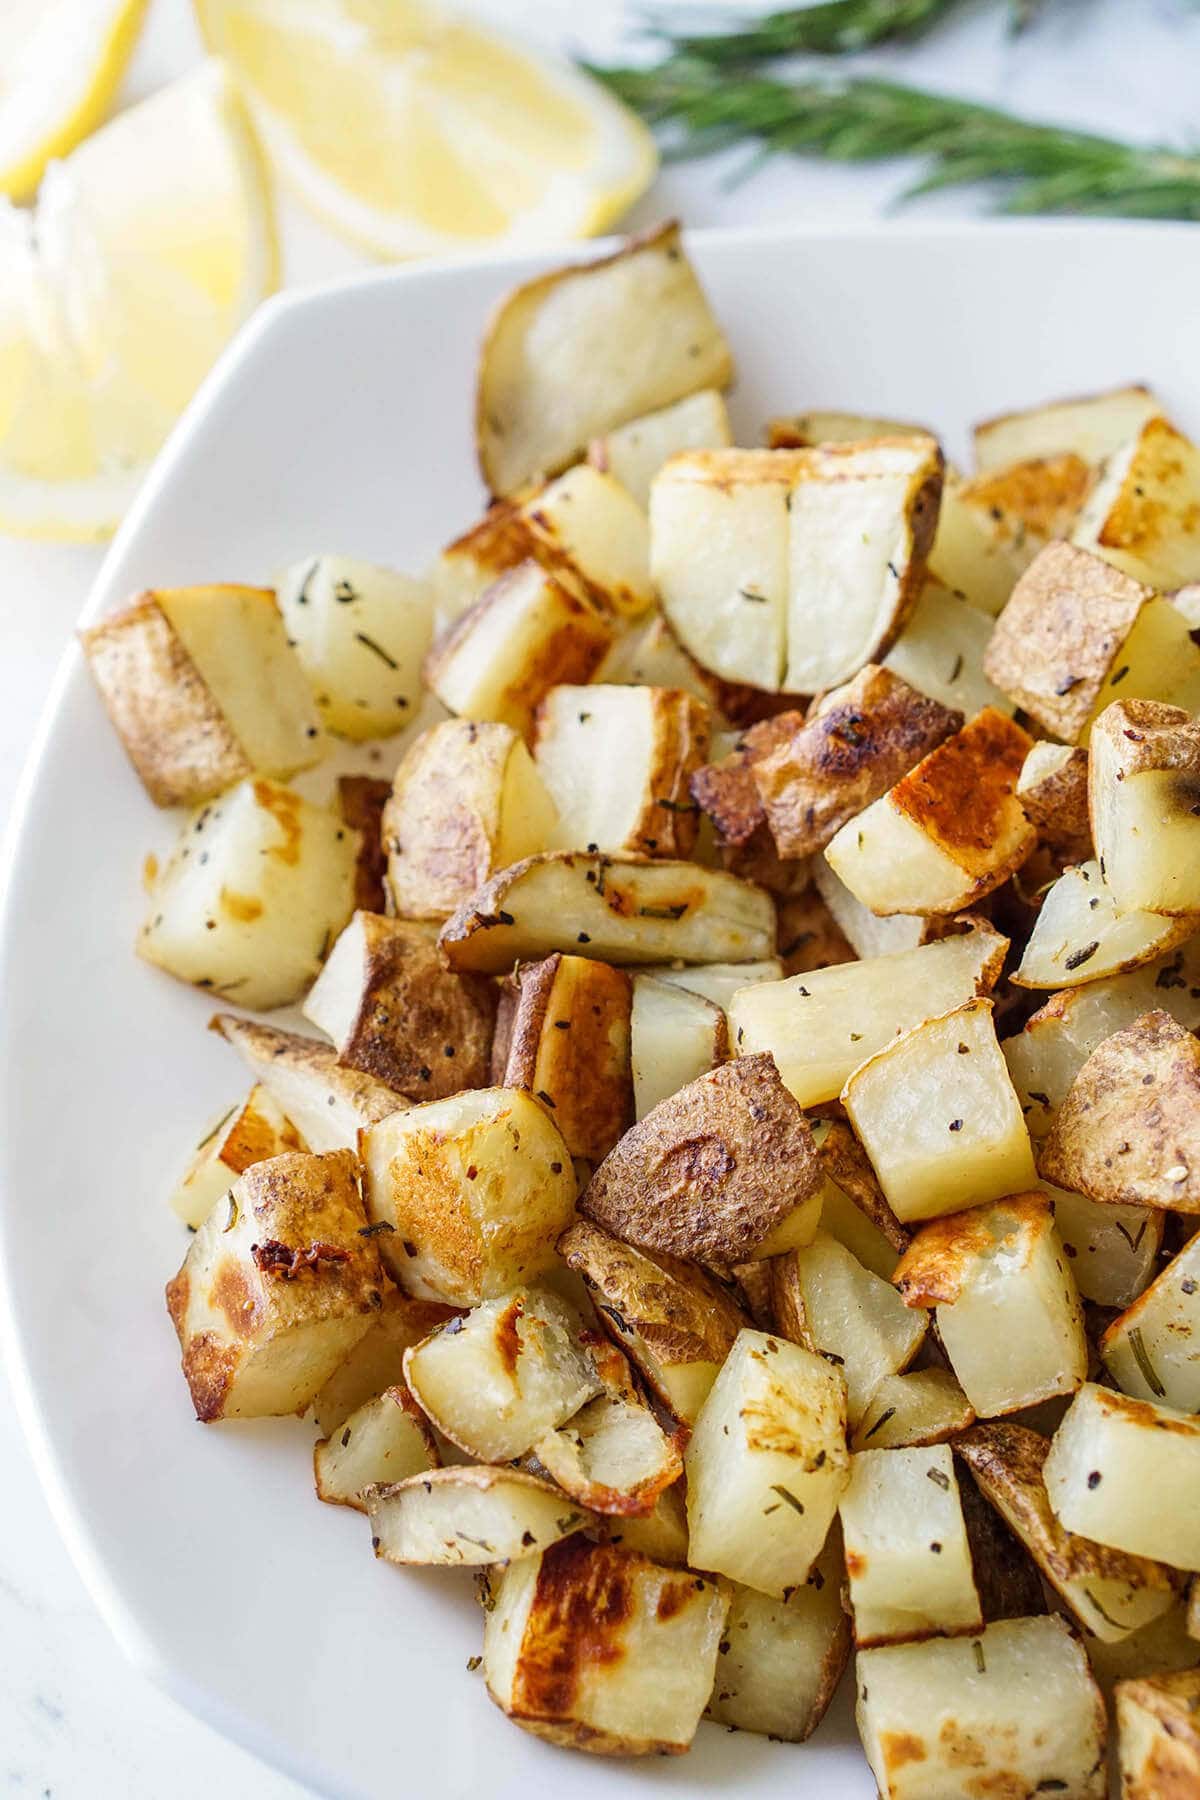 Roasted potatoes on white plate with lemon and rosemary.